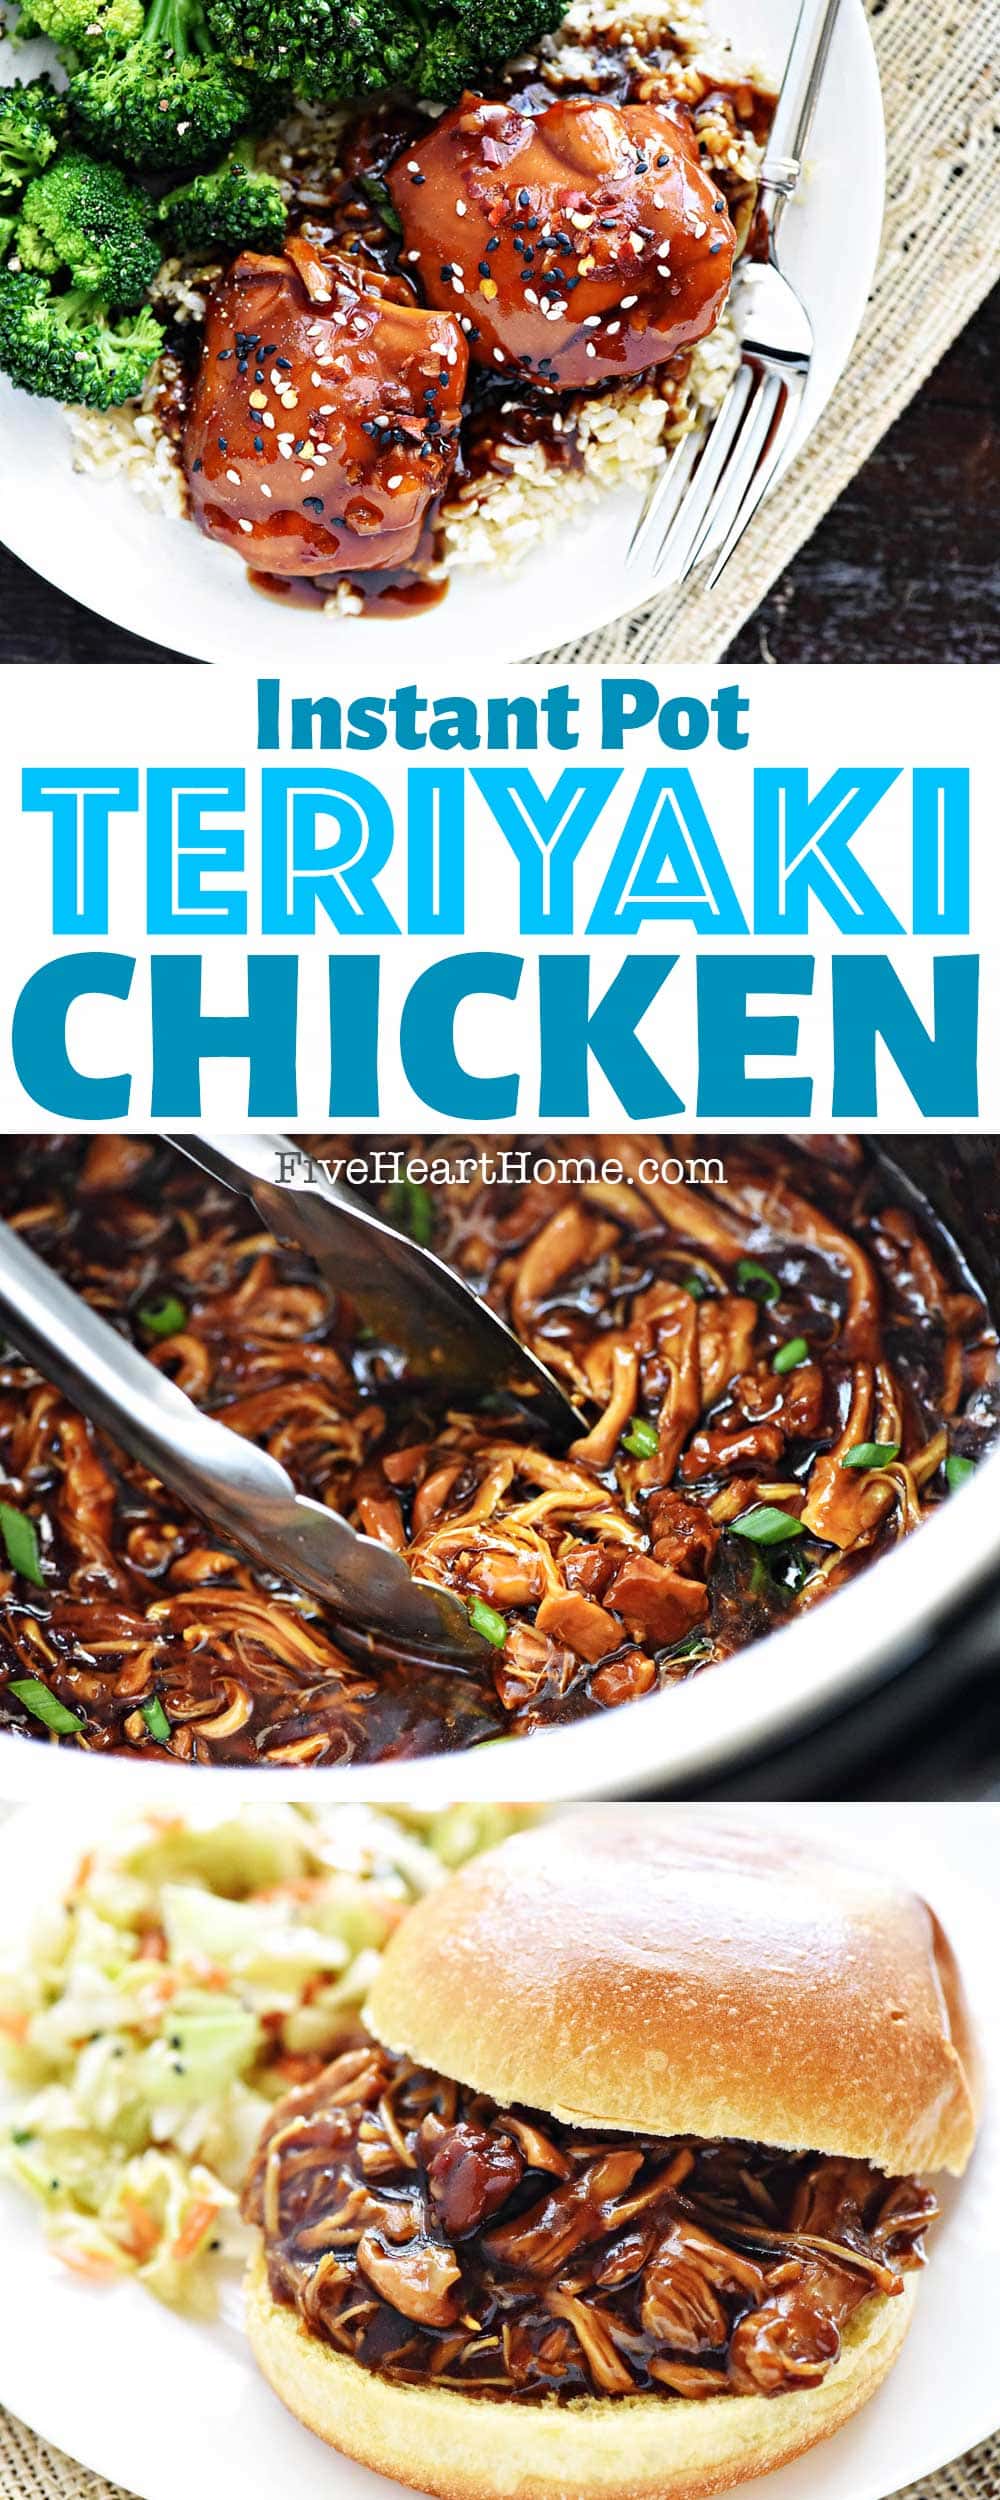 Instant Pot Teriyaki Chicken ~ a quick, easy pressure cooker recipe featuring chicken thighs in a sticky-sweet homemade sauce. Serve this teriyaki chicken recipe over rice or quinoa, or shred it as a sandwich filling! | FiveHeartHome.com via @fivehearthome